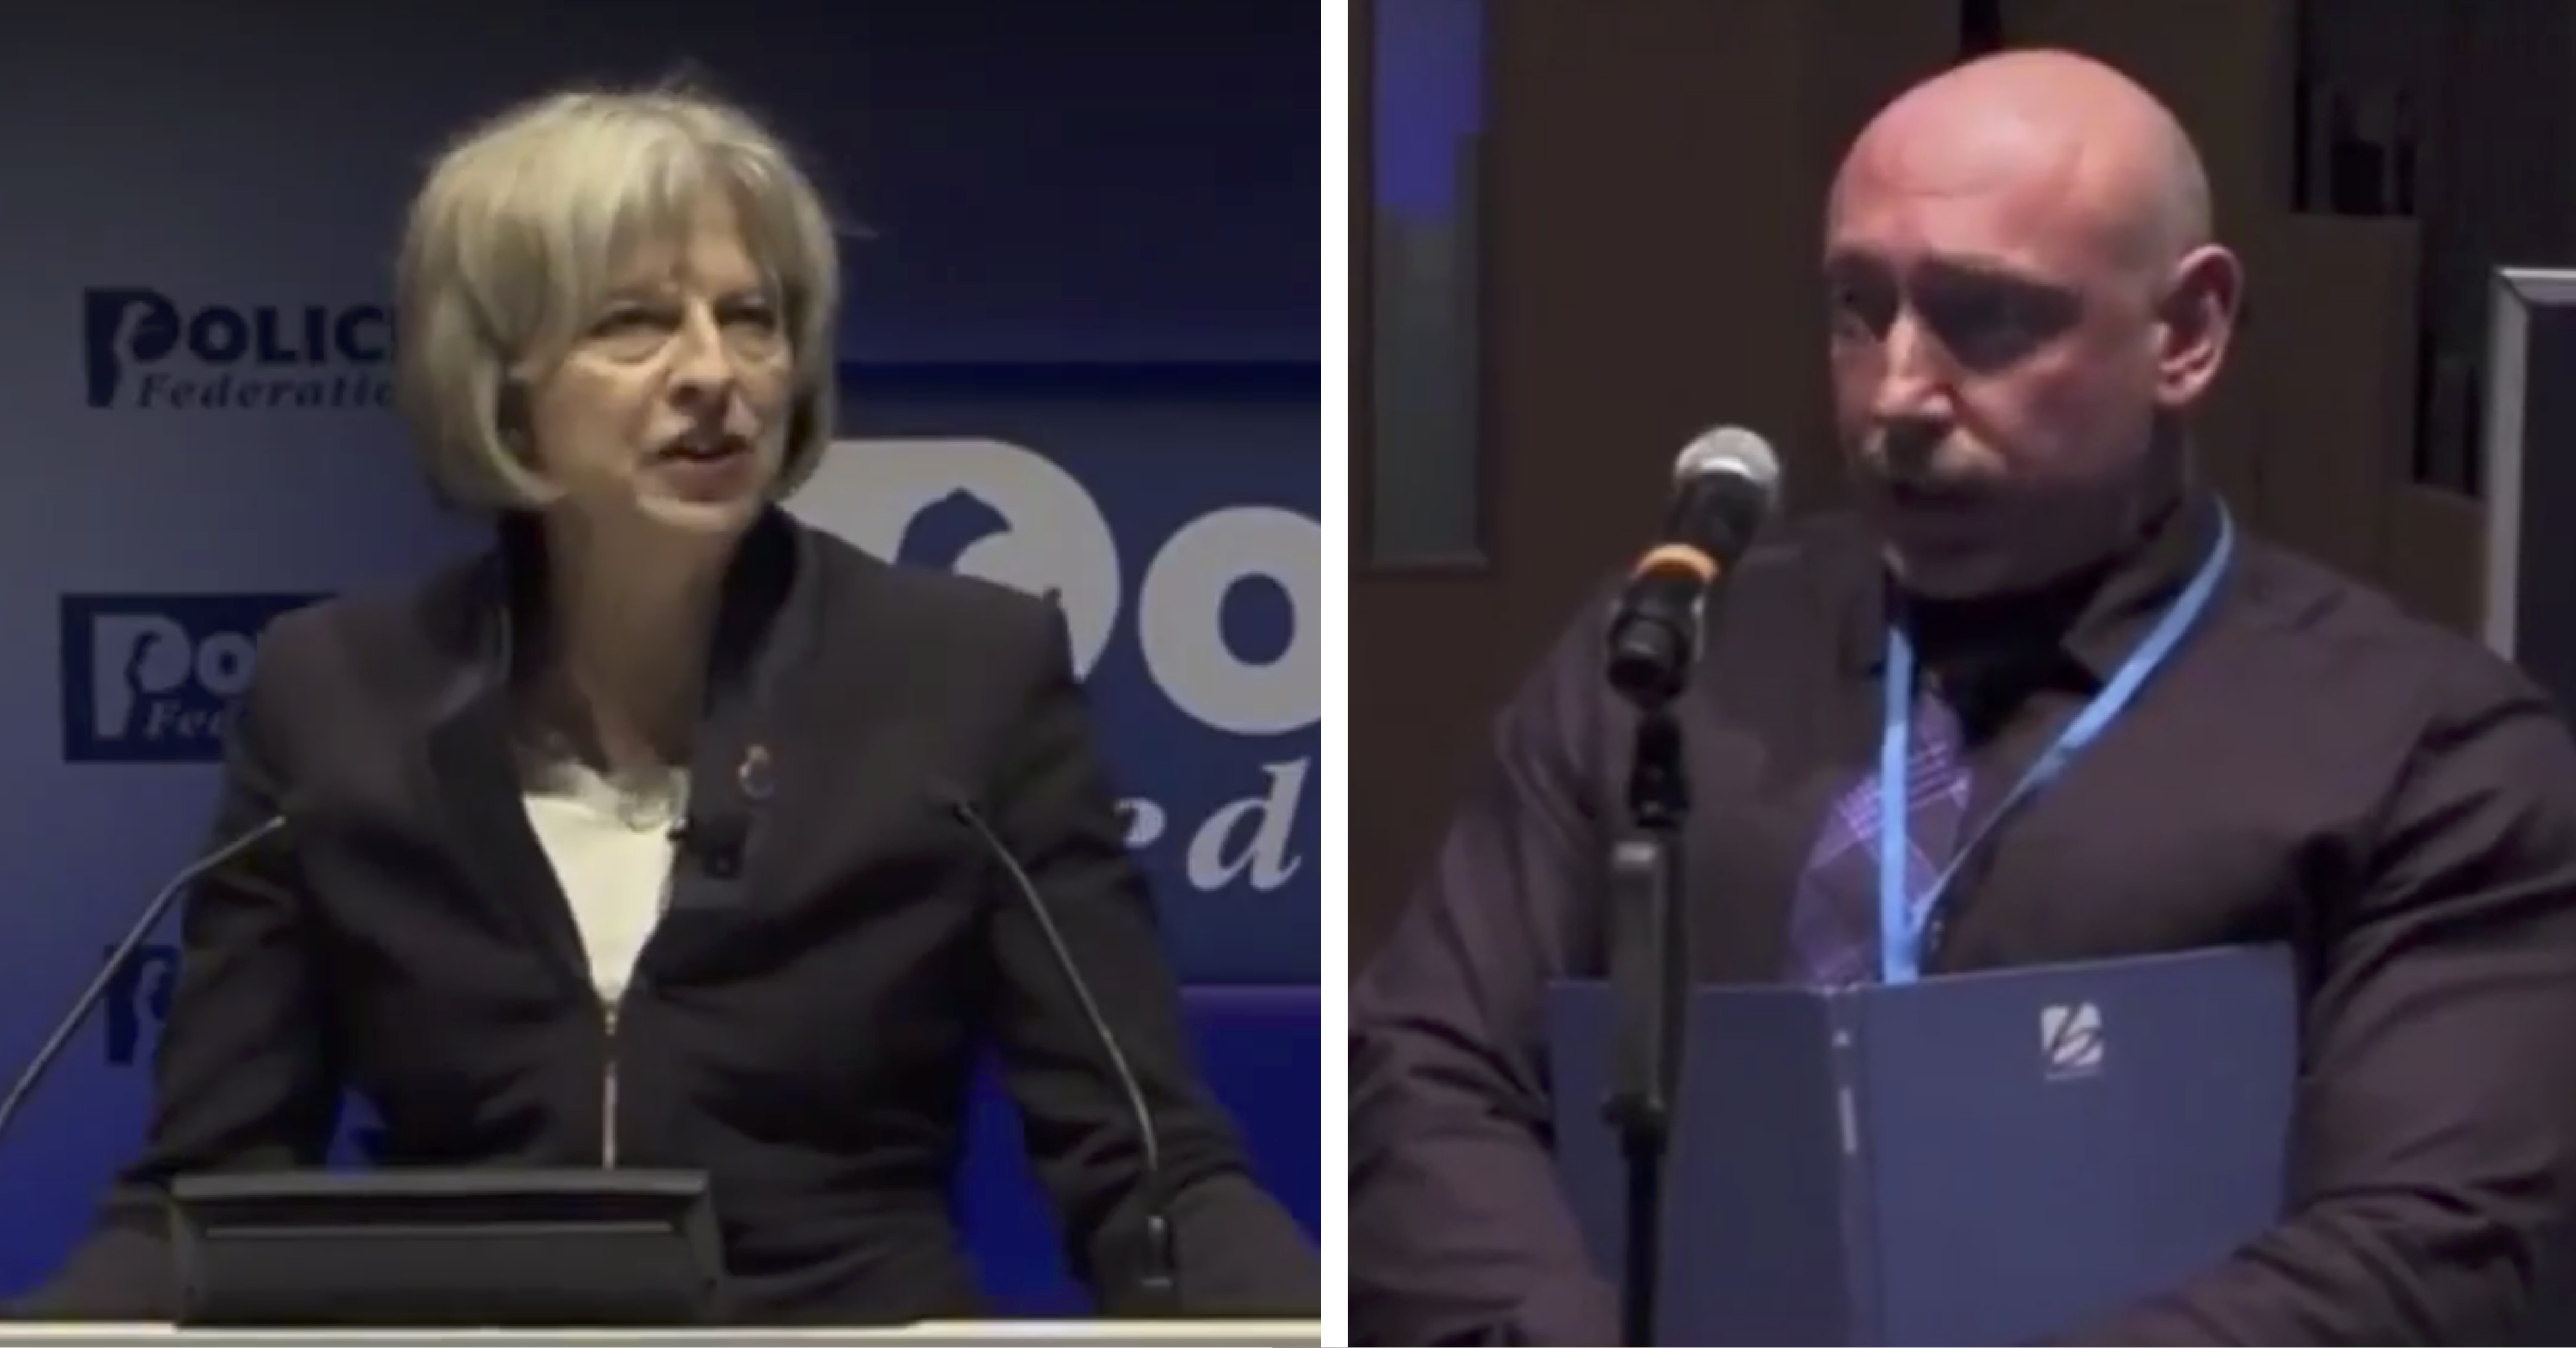 WATCH: Manchester cop tells Theresa May cuts WILL lead to terrorism. May said he's 'scaremongering' & 'crying wolf'